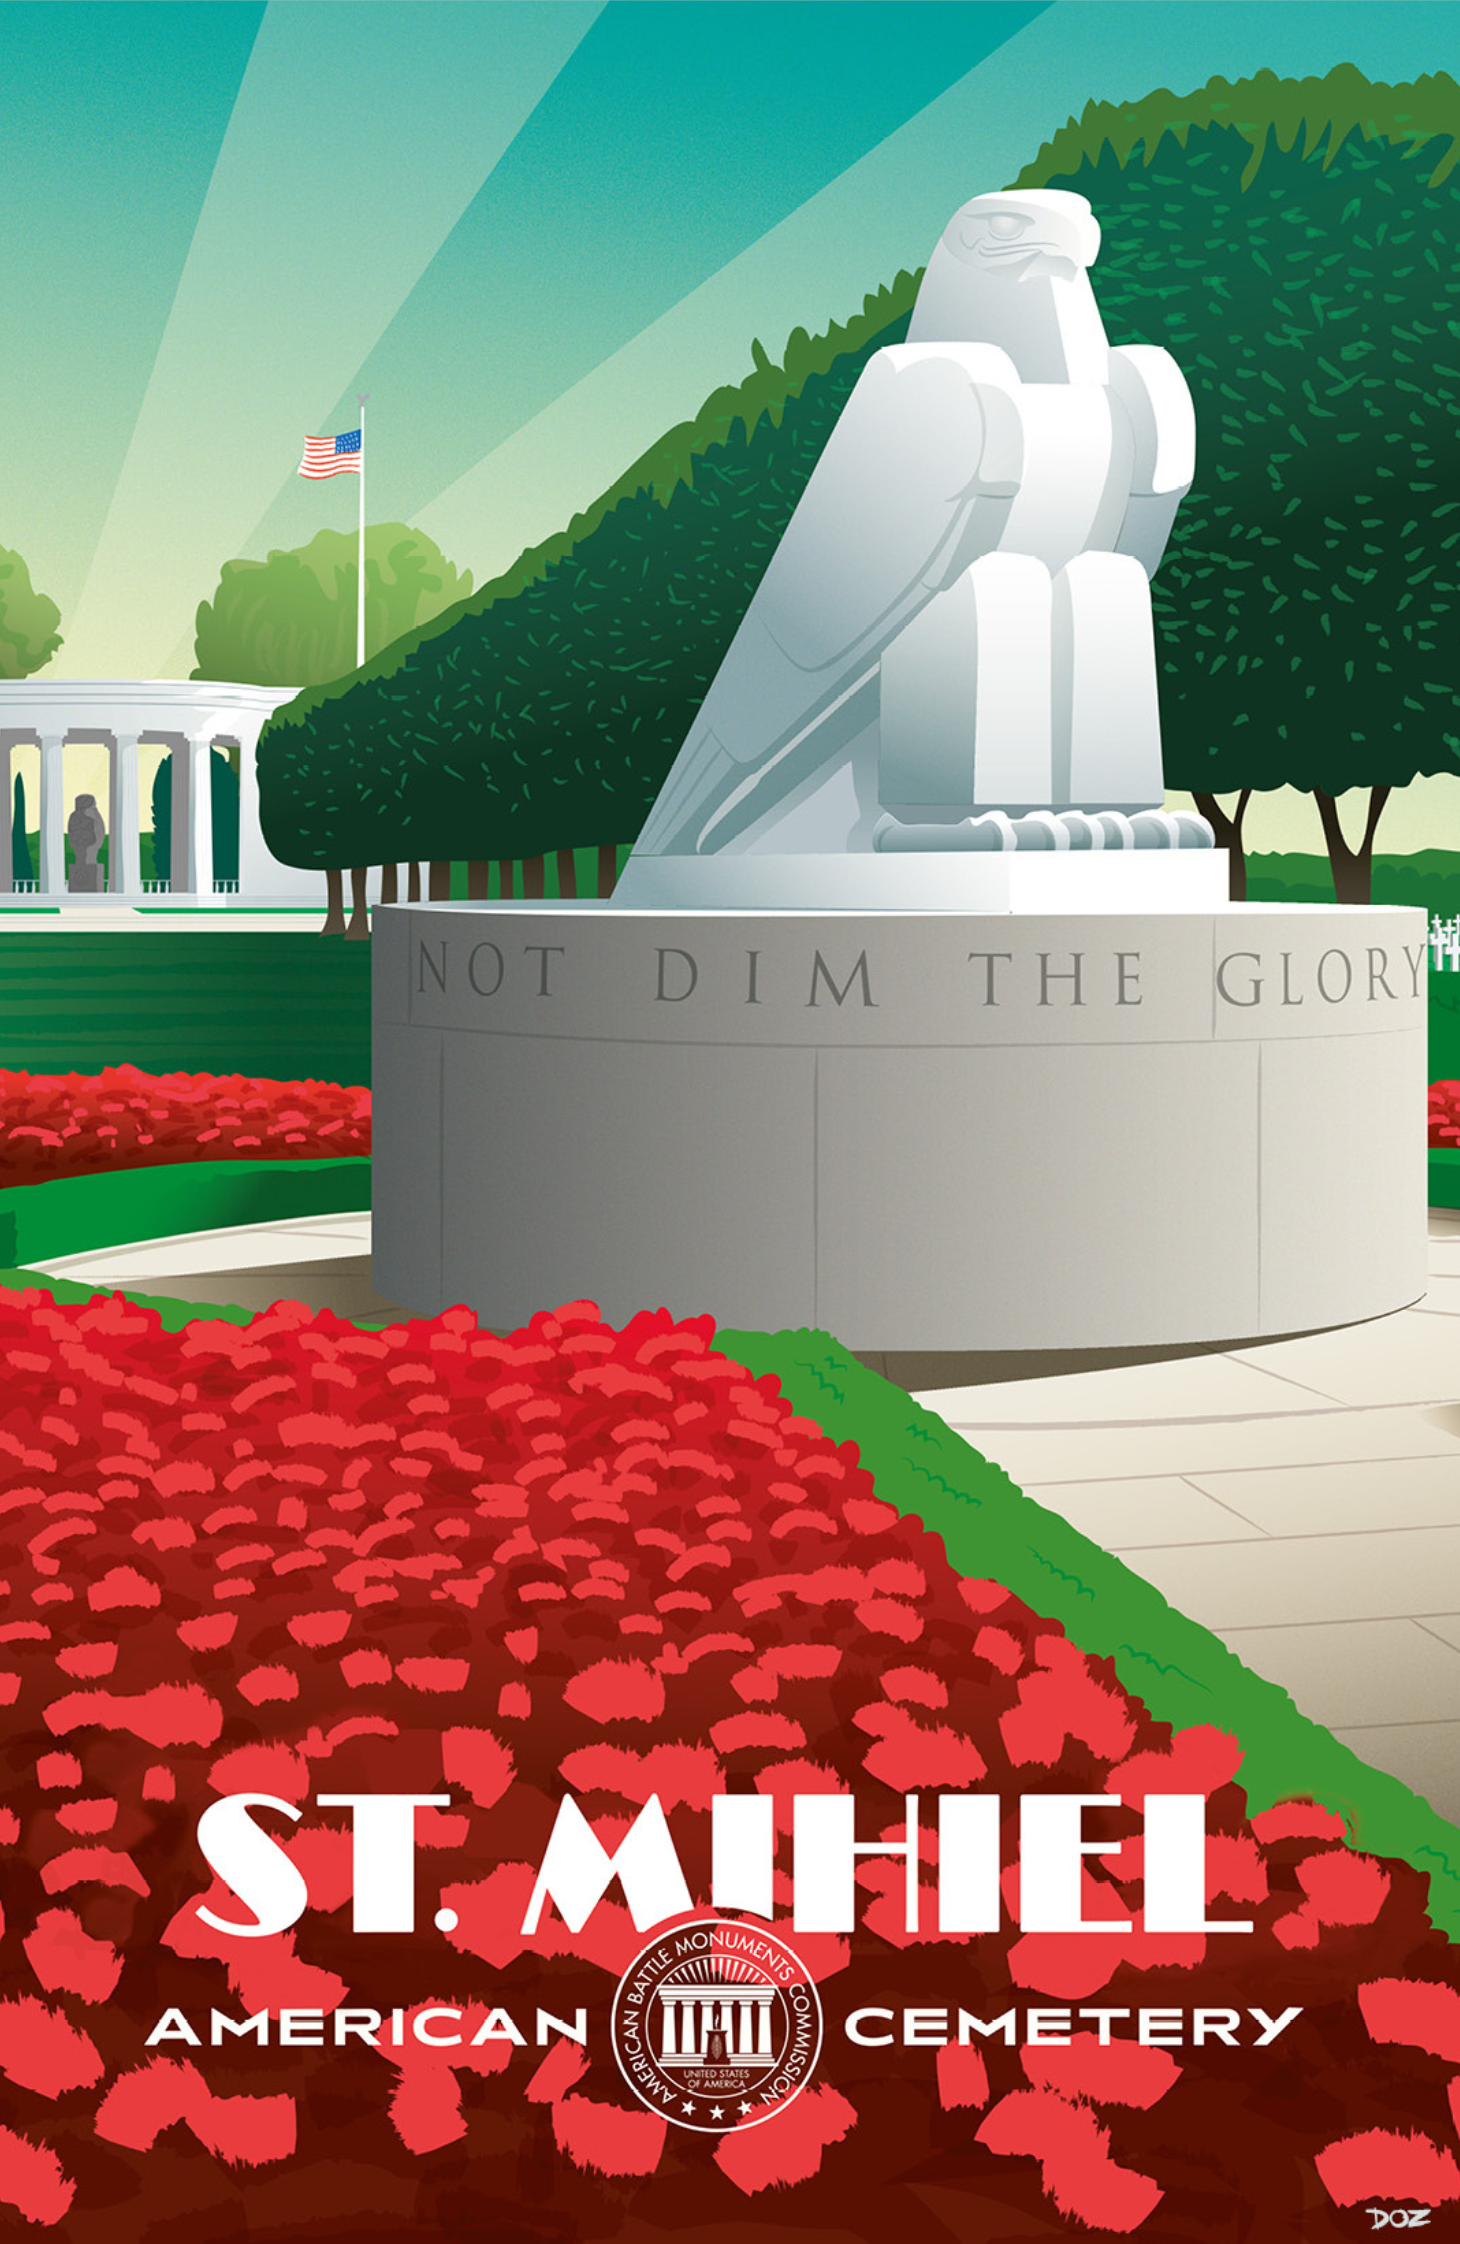 Vintage poster of St. Mihiel American Cemetery